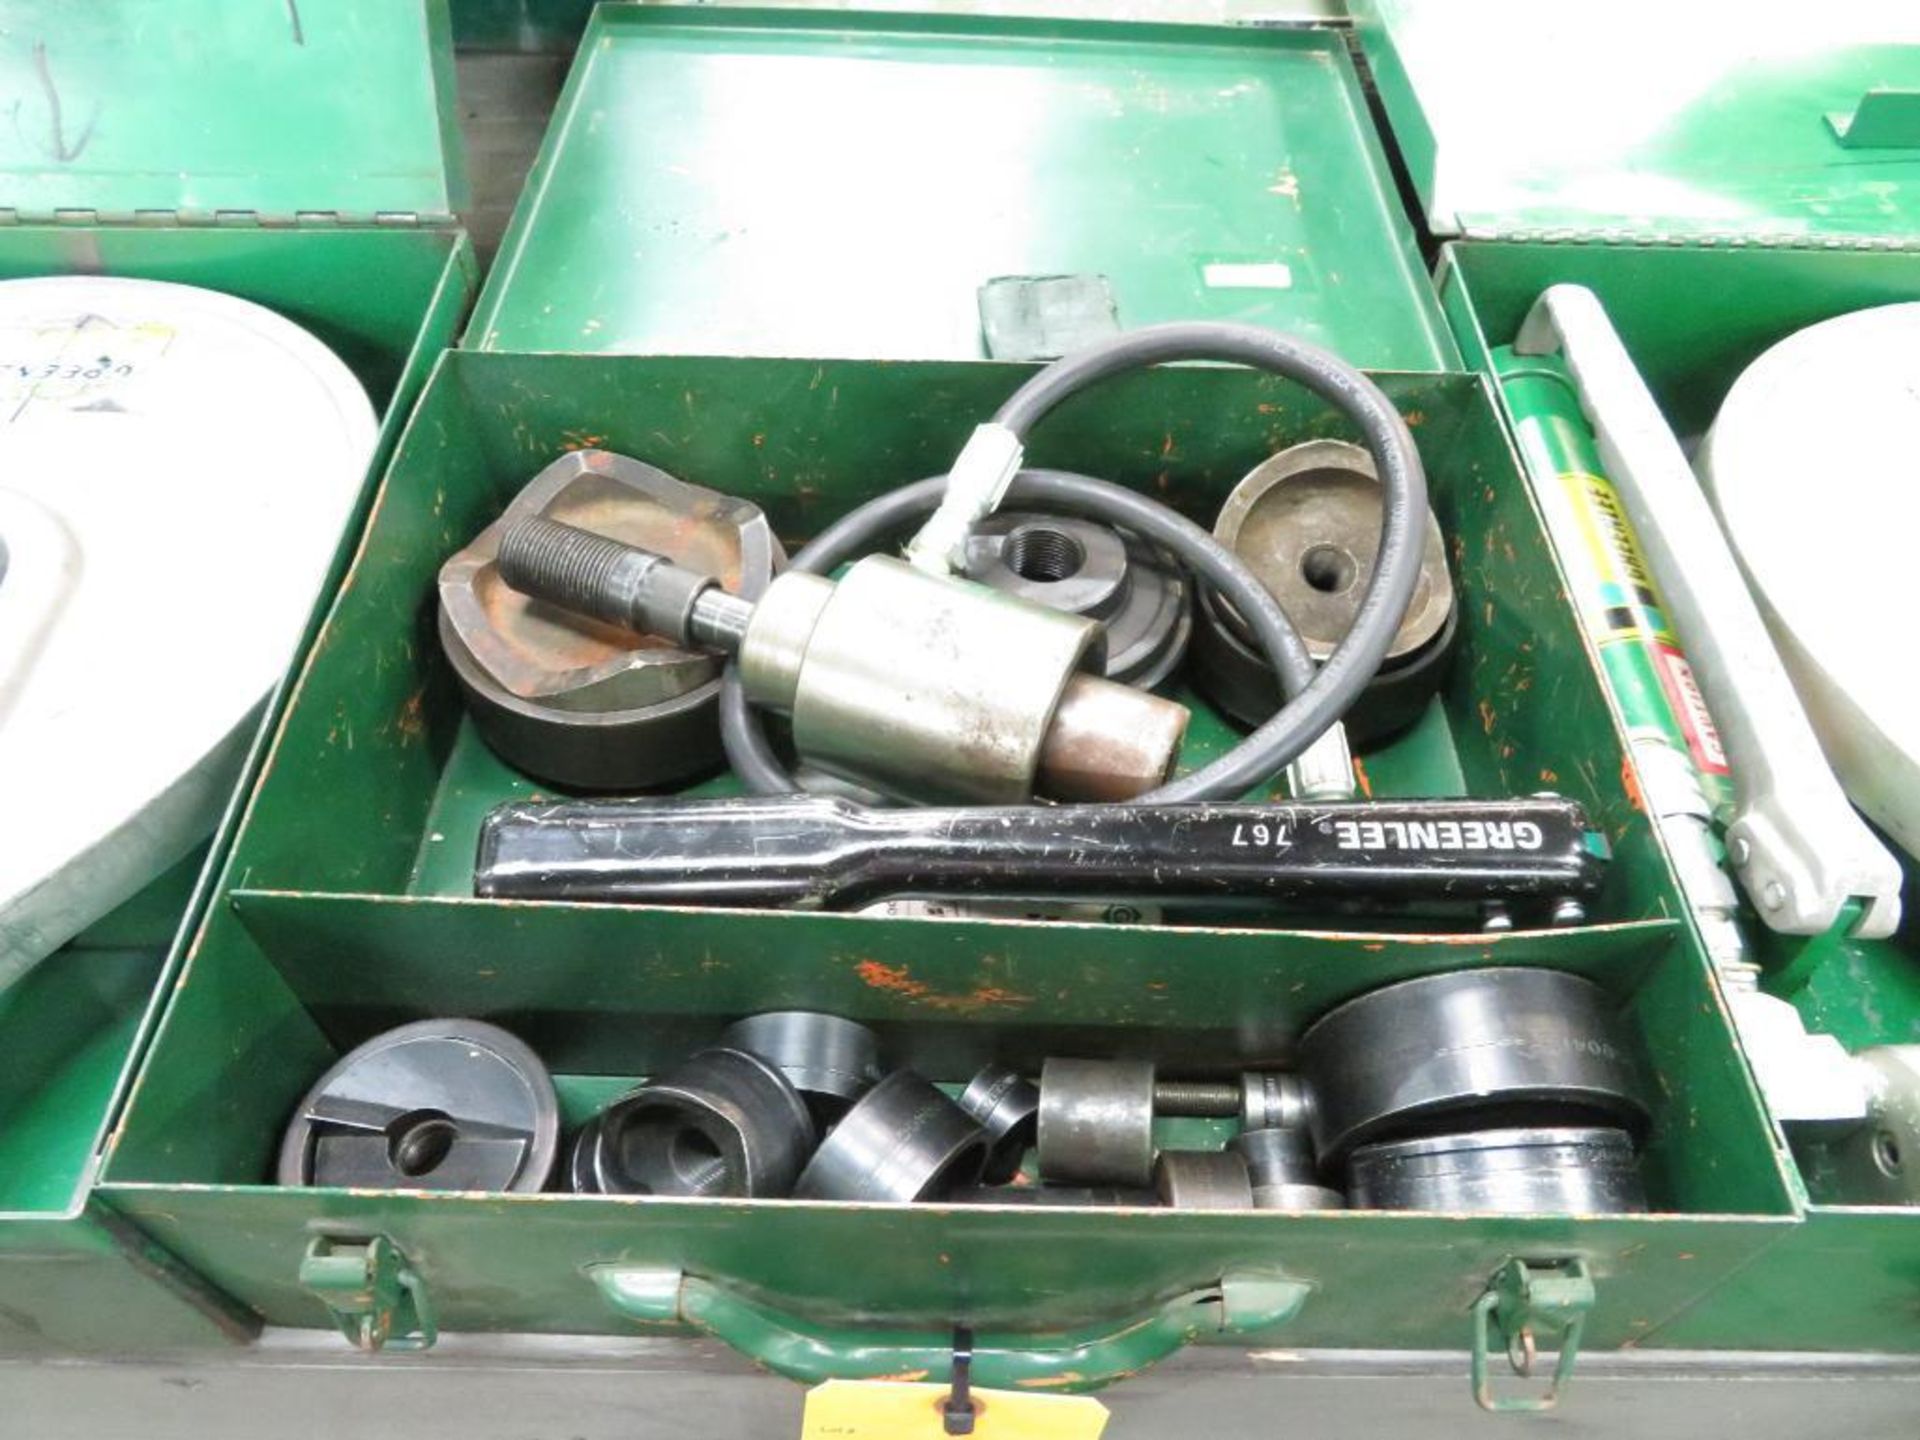 LOT: Greenlee No. 767 Hydraulic Punch Set, with Manual Pump, Dies, Case